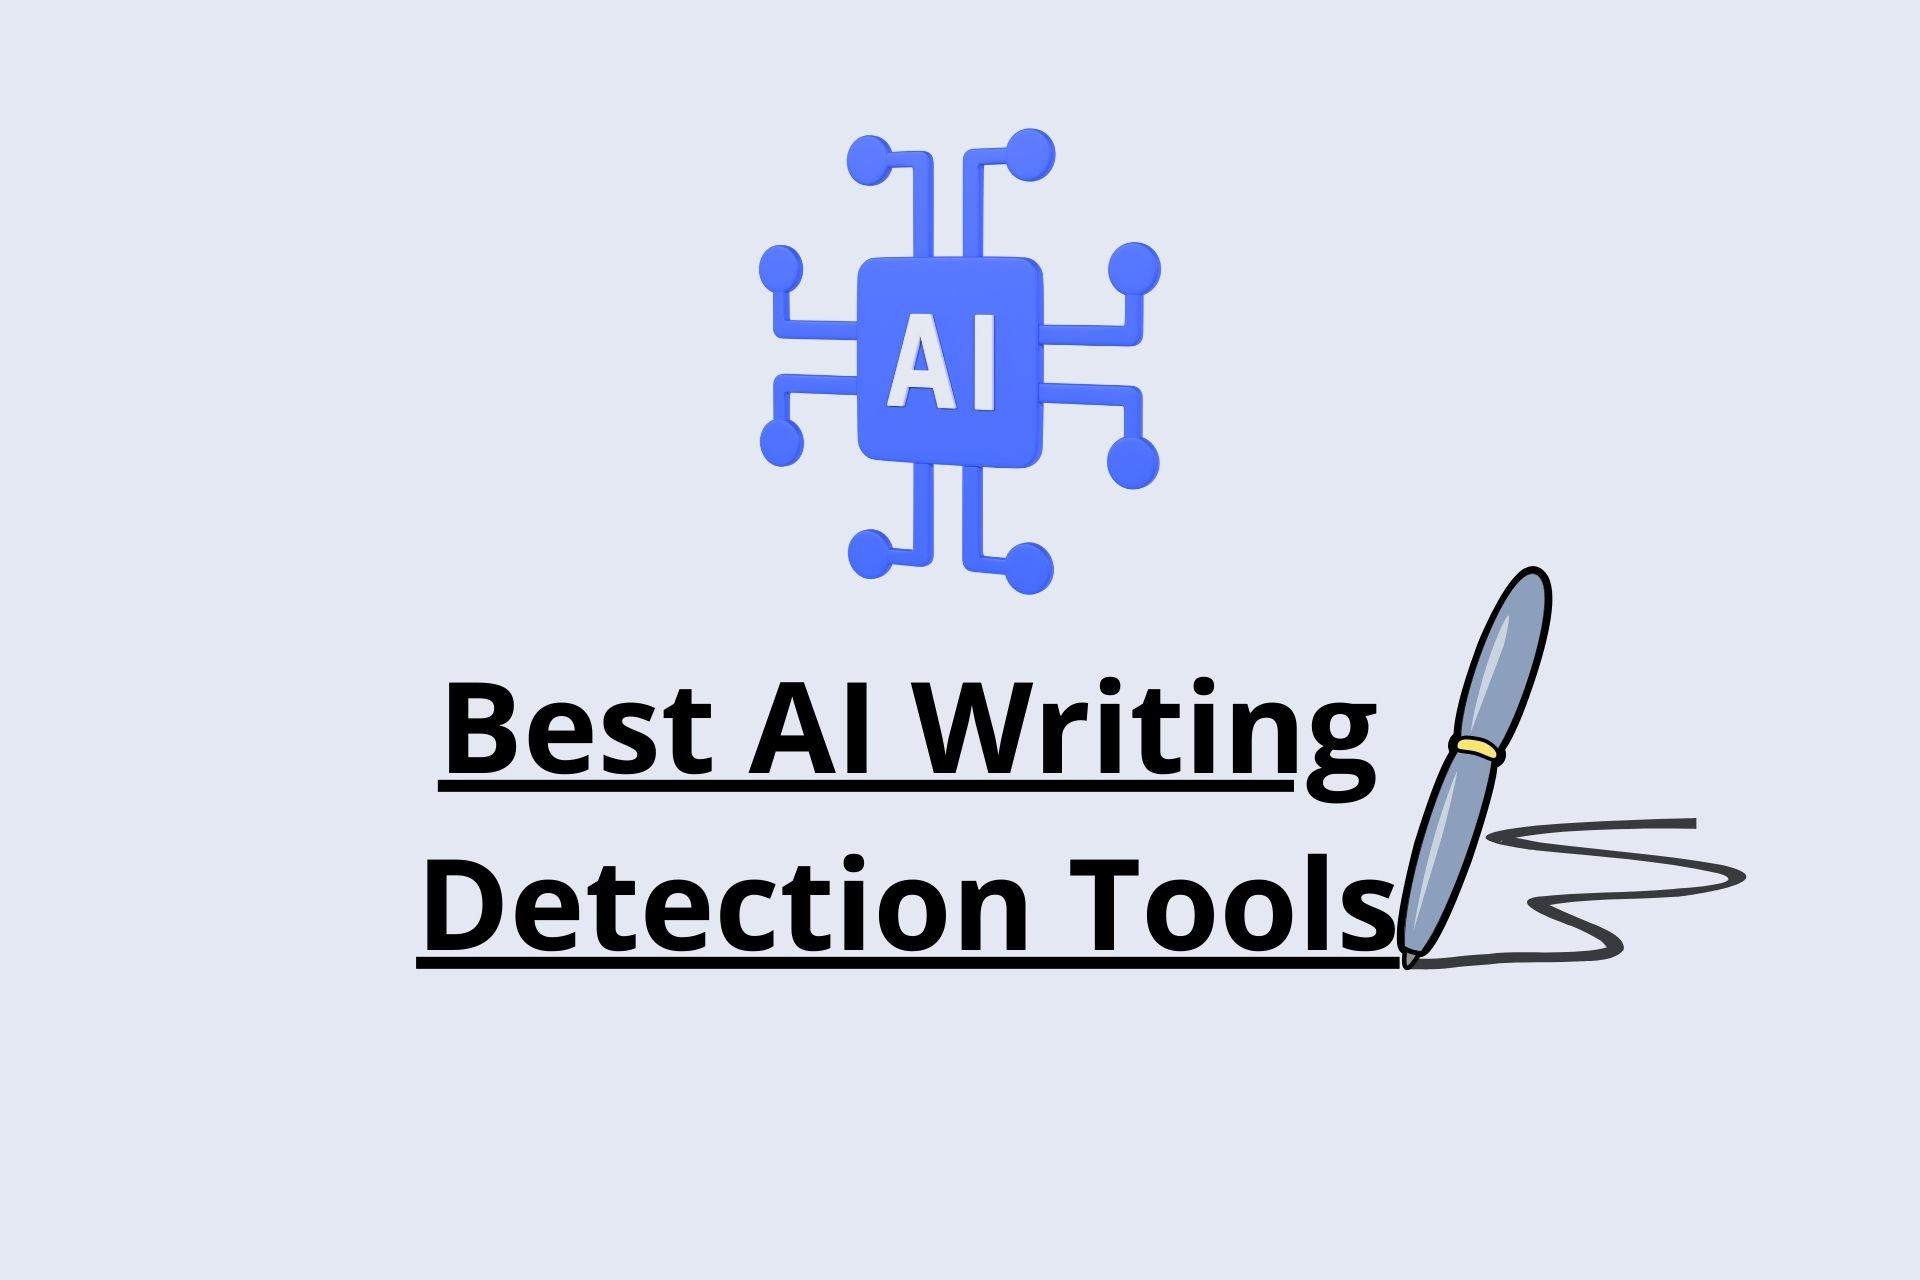 Best AI Writing Detection Tools